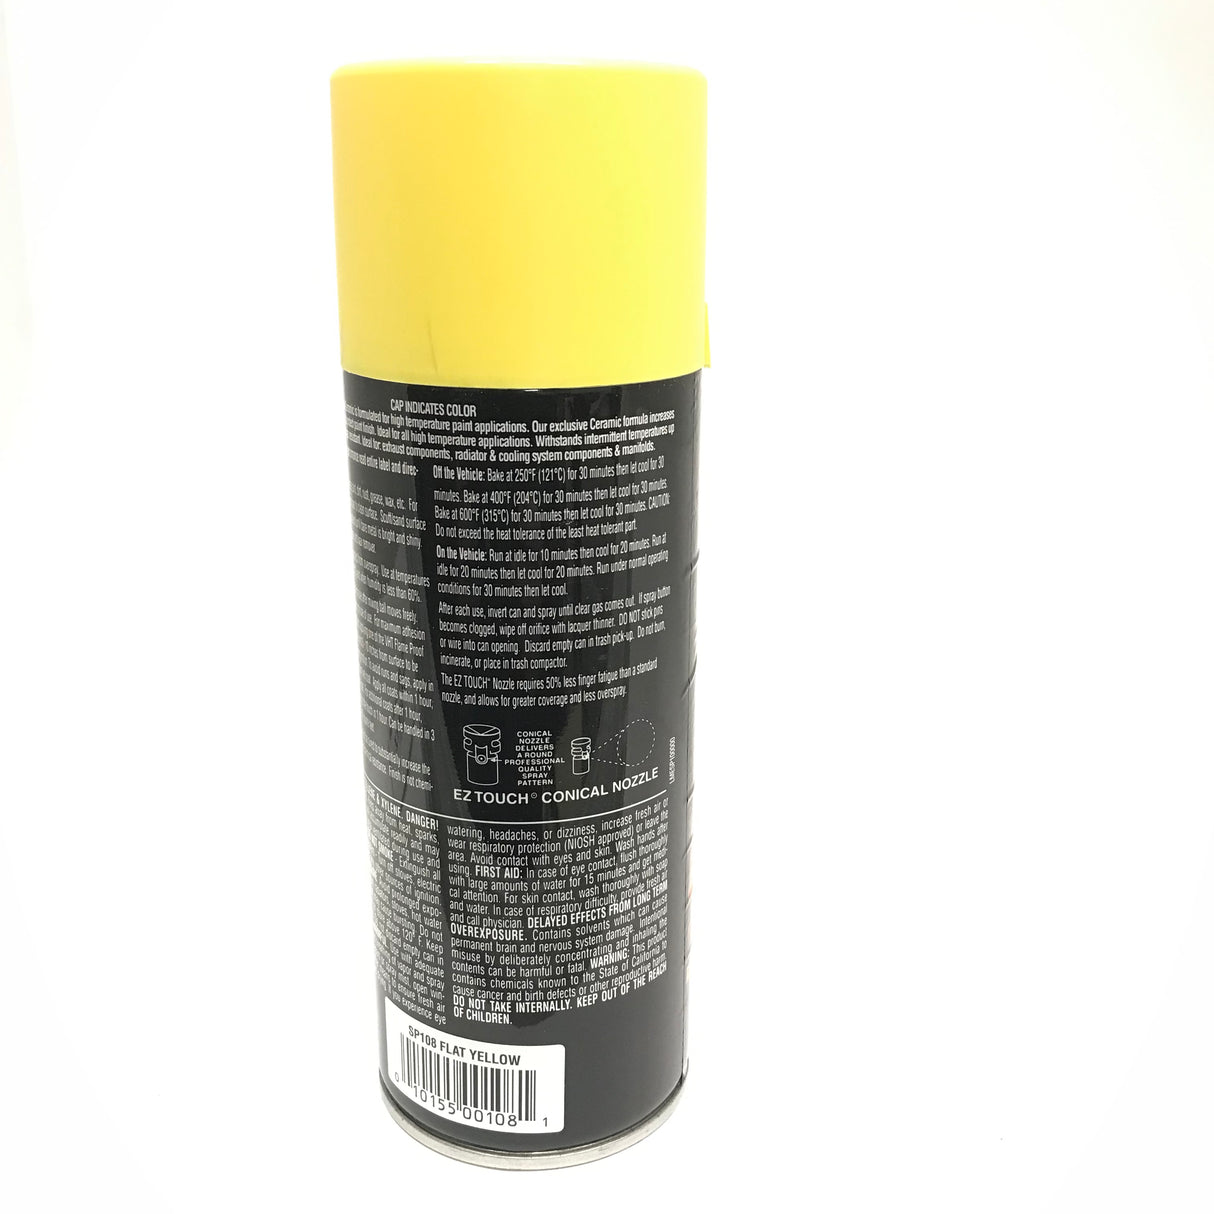 VHT SP108-6 PACK High Temperature Flame Proof FLAT YELLOW Header Spray Paint - 11oz